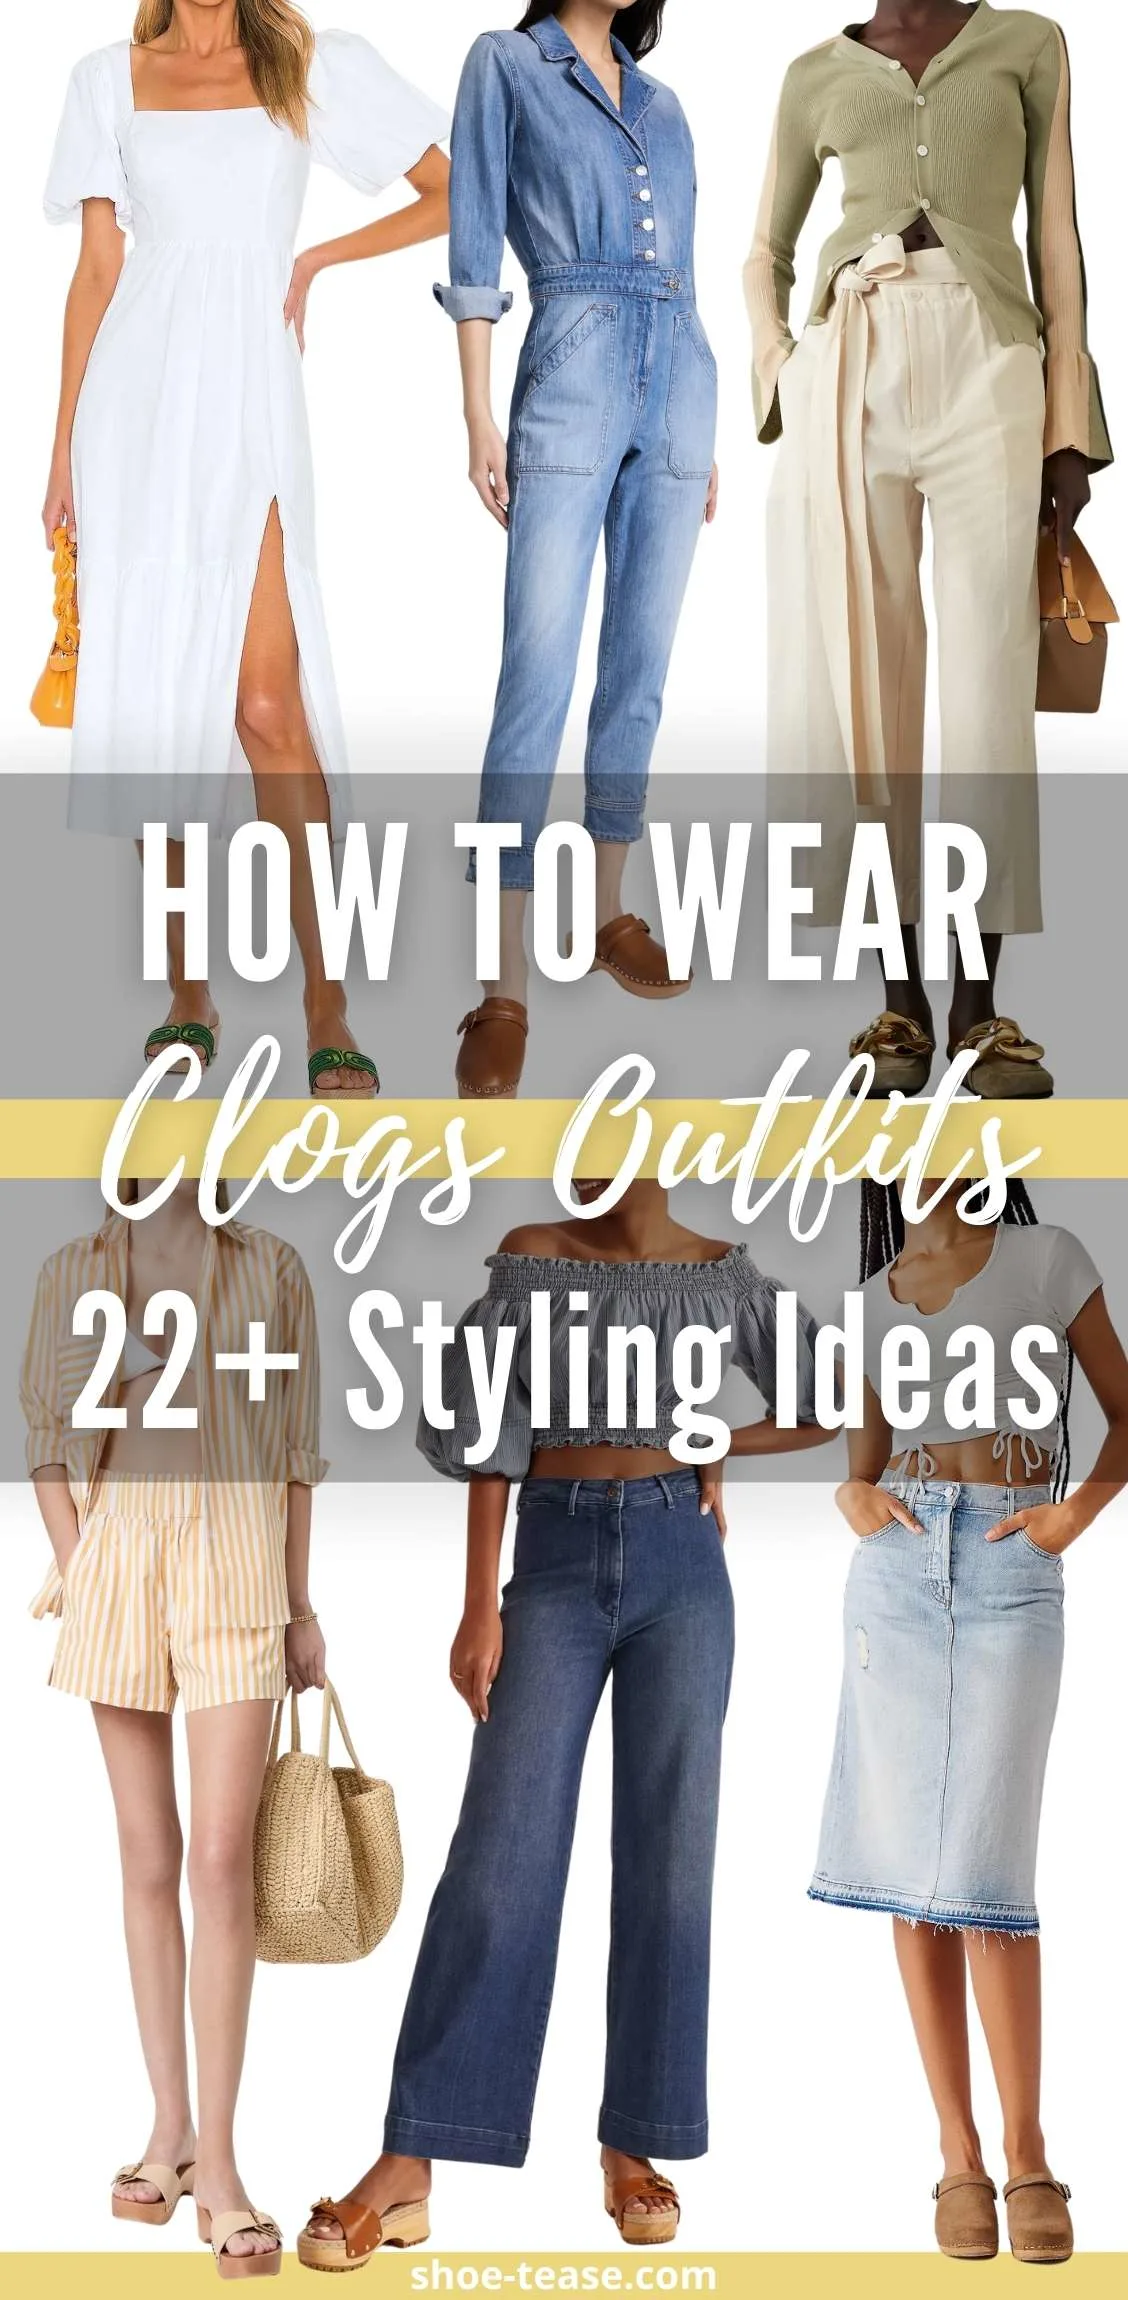 Text reading how to wear clogs outfits 22 plus styling ideas over collage of 6 women wearing different clogs outfits.